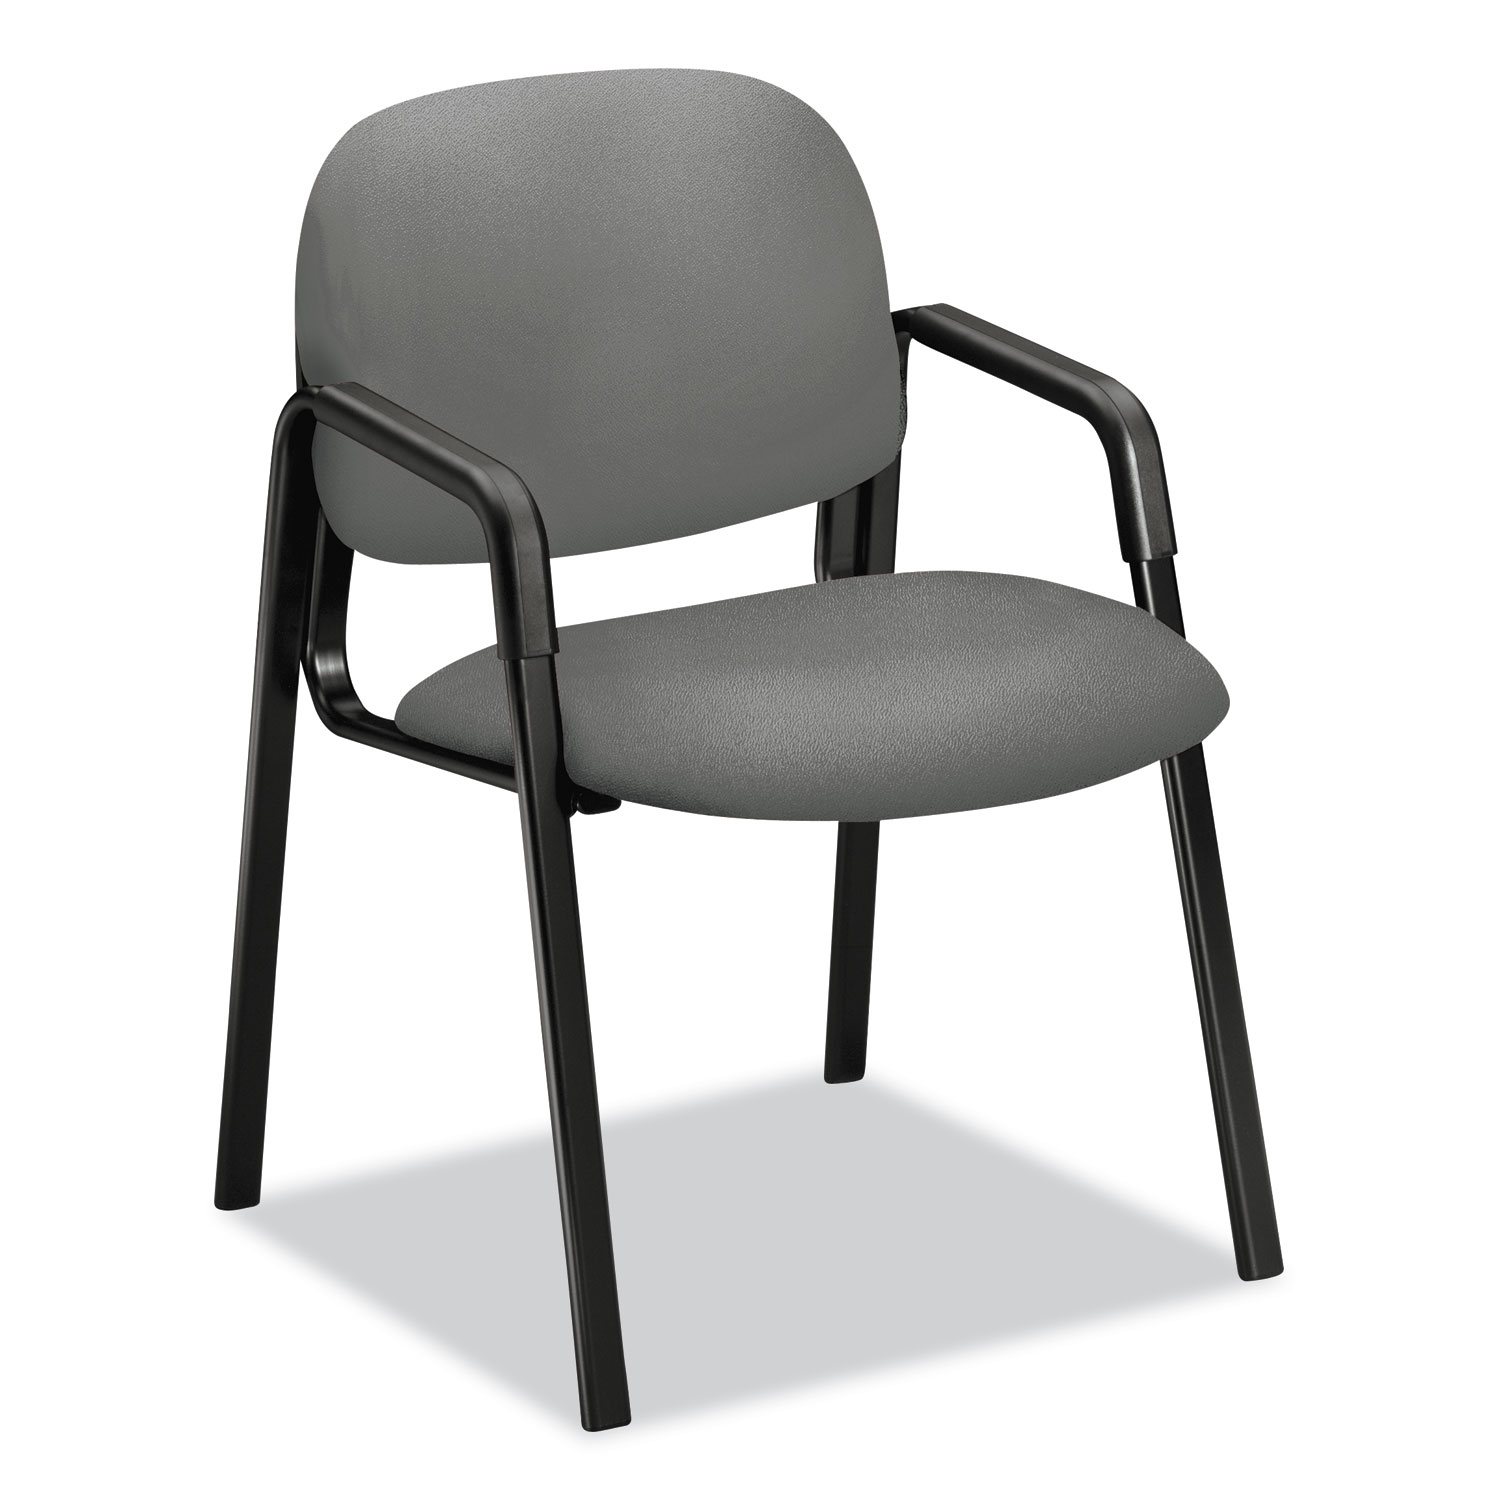  HON HON4003CU22T Solutions Seating 4000 Series Leg Base Guest Chair, 23.5 x 24.5 x 32, Frost Seat, Frost Back, Black Base (HON4003CU22T) 